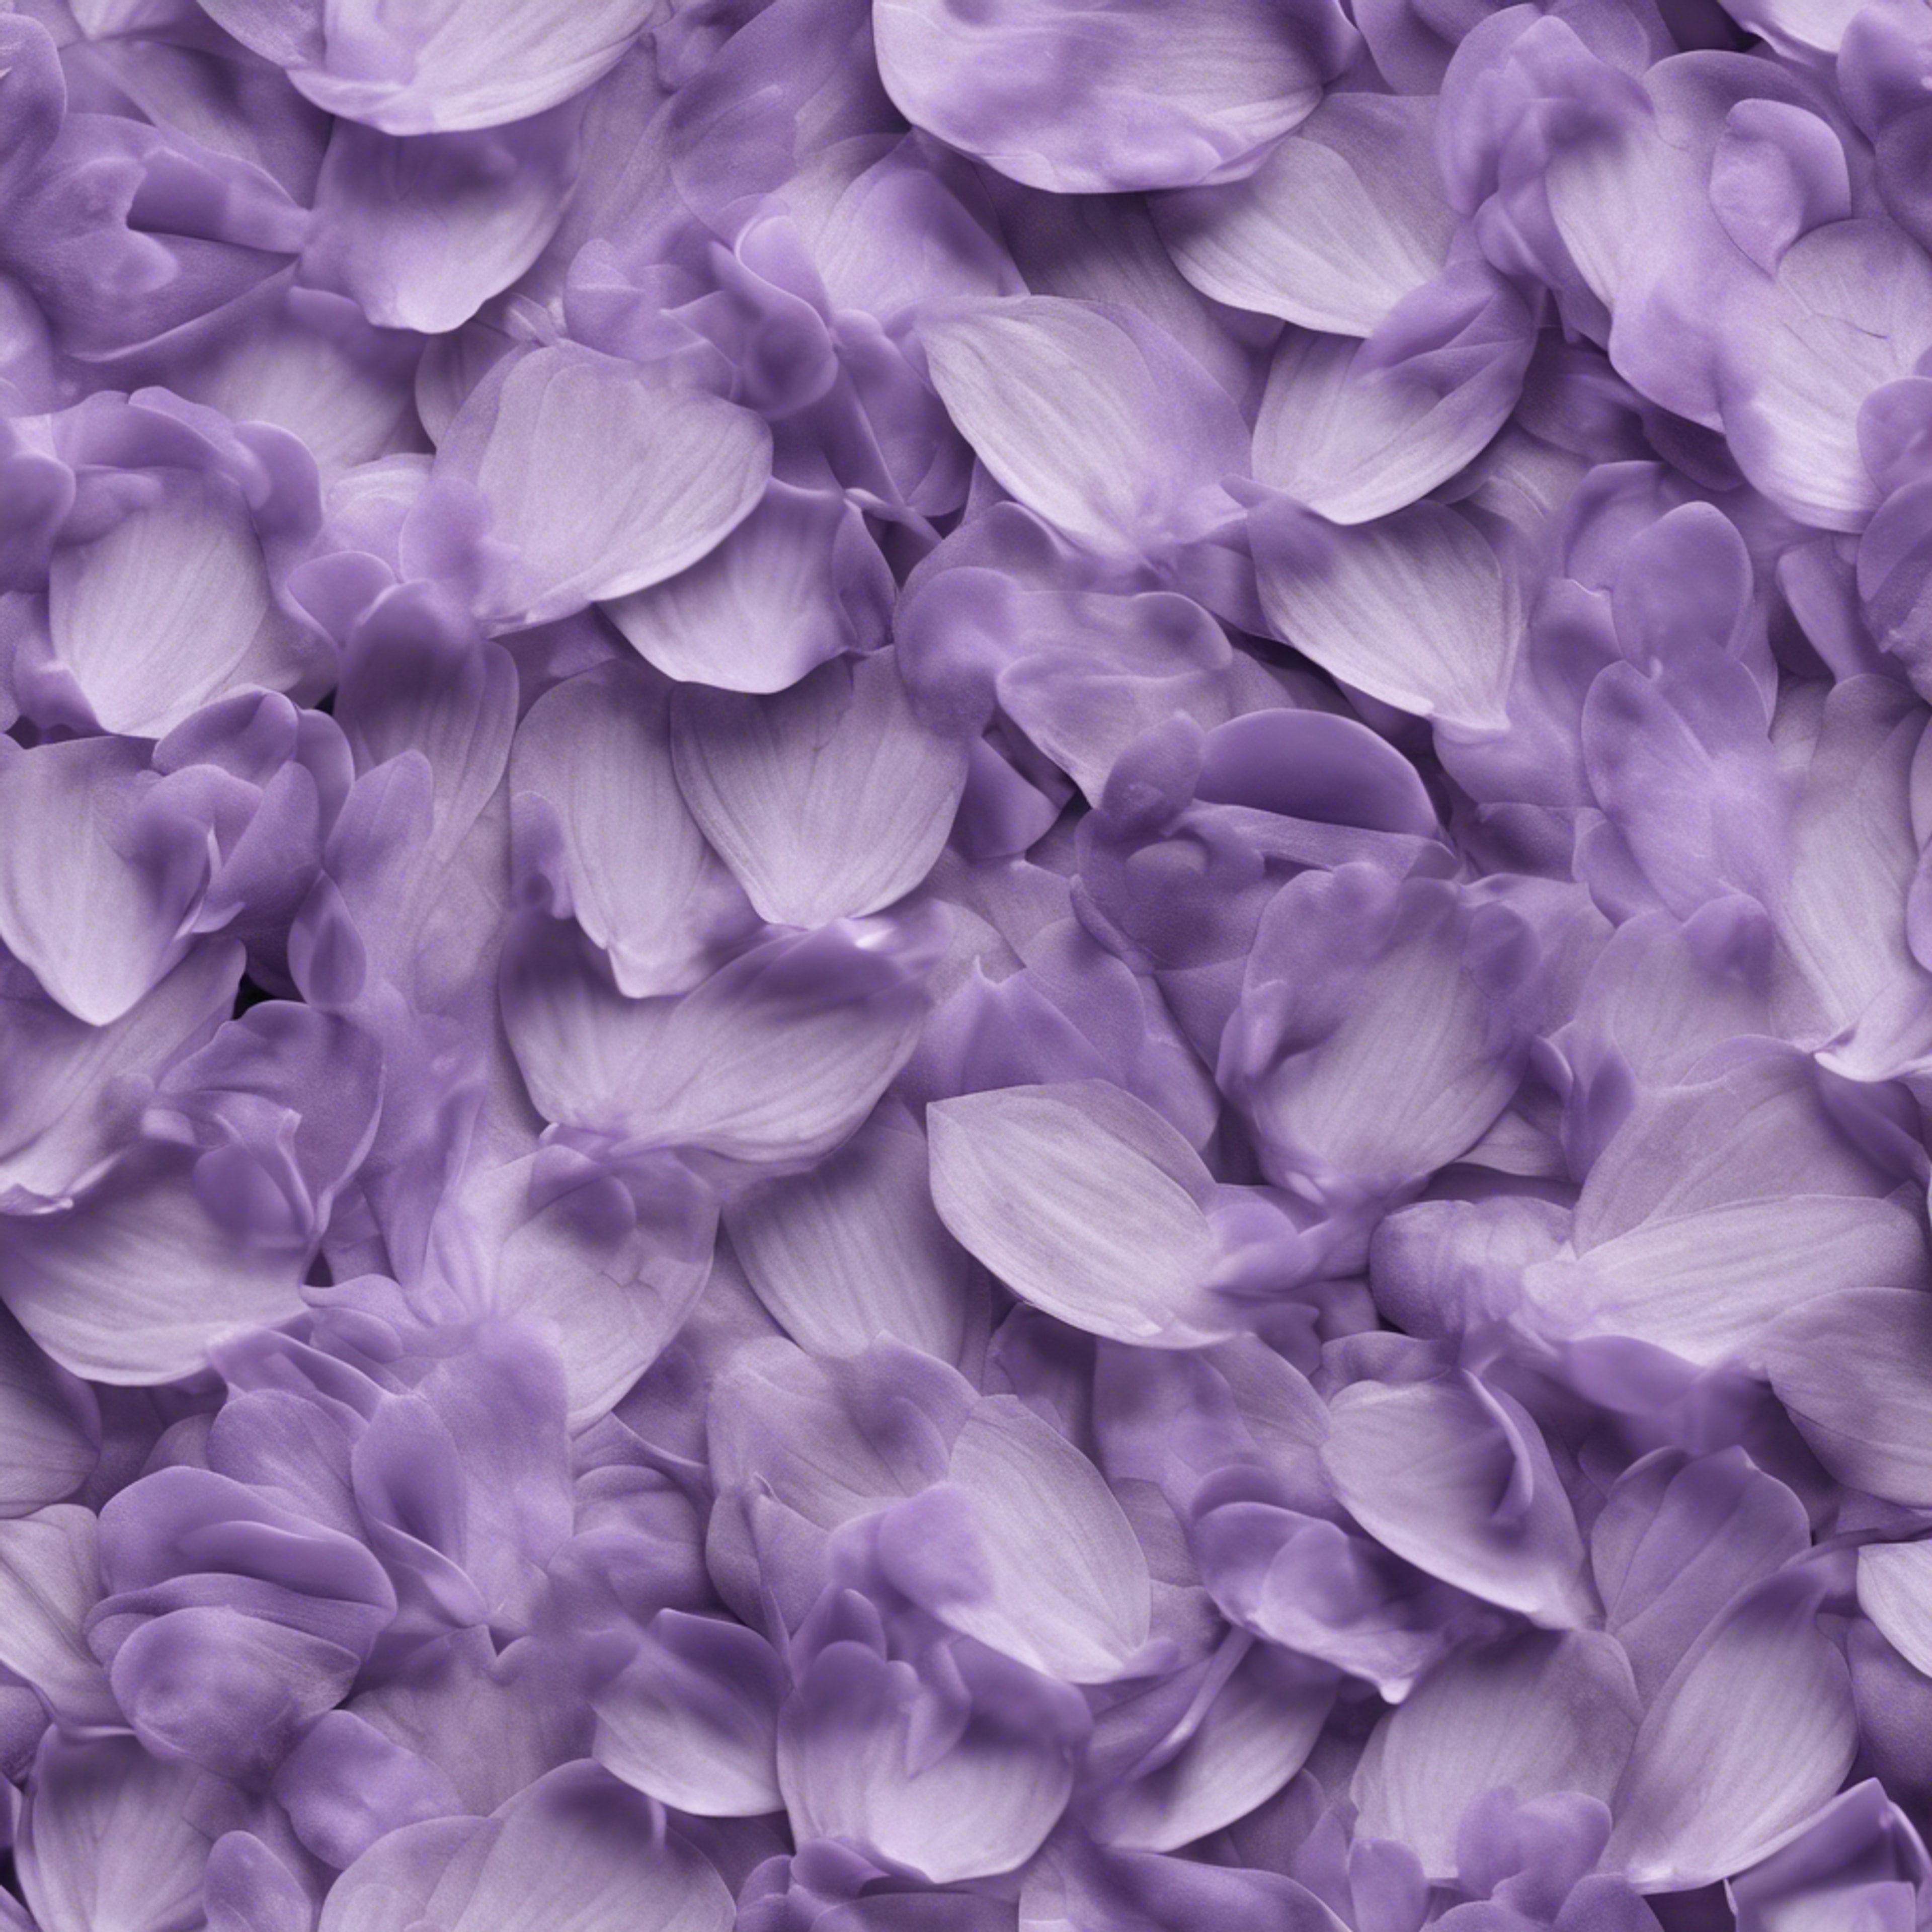 Seamless delicate pattern of layered lavender petals ورق الجدران[df581ced6ed94056816b]